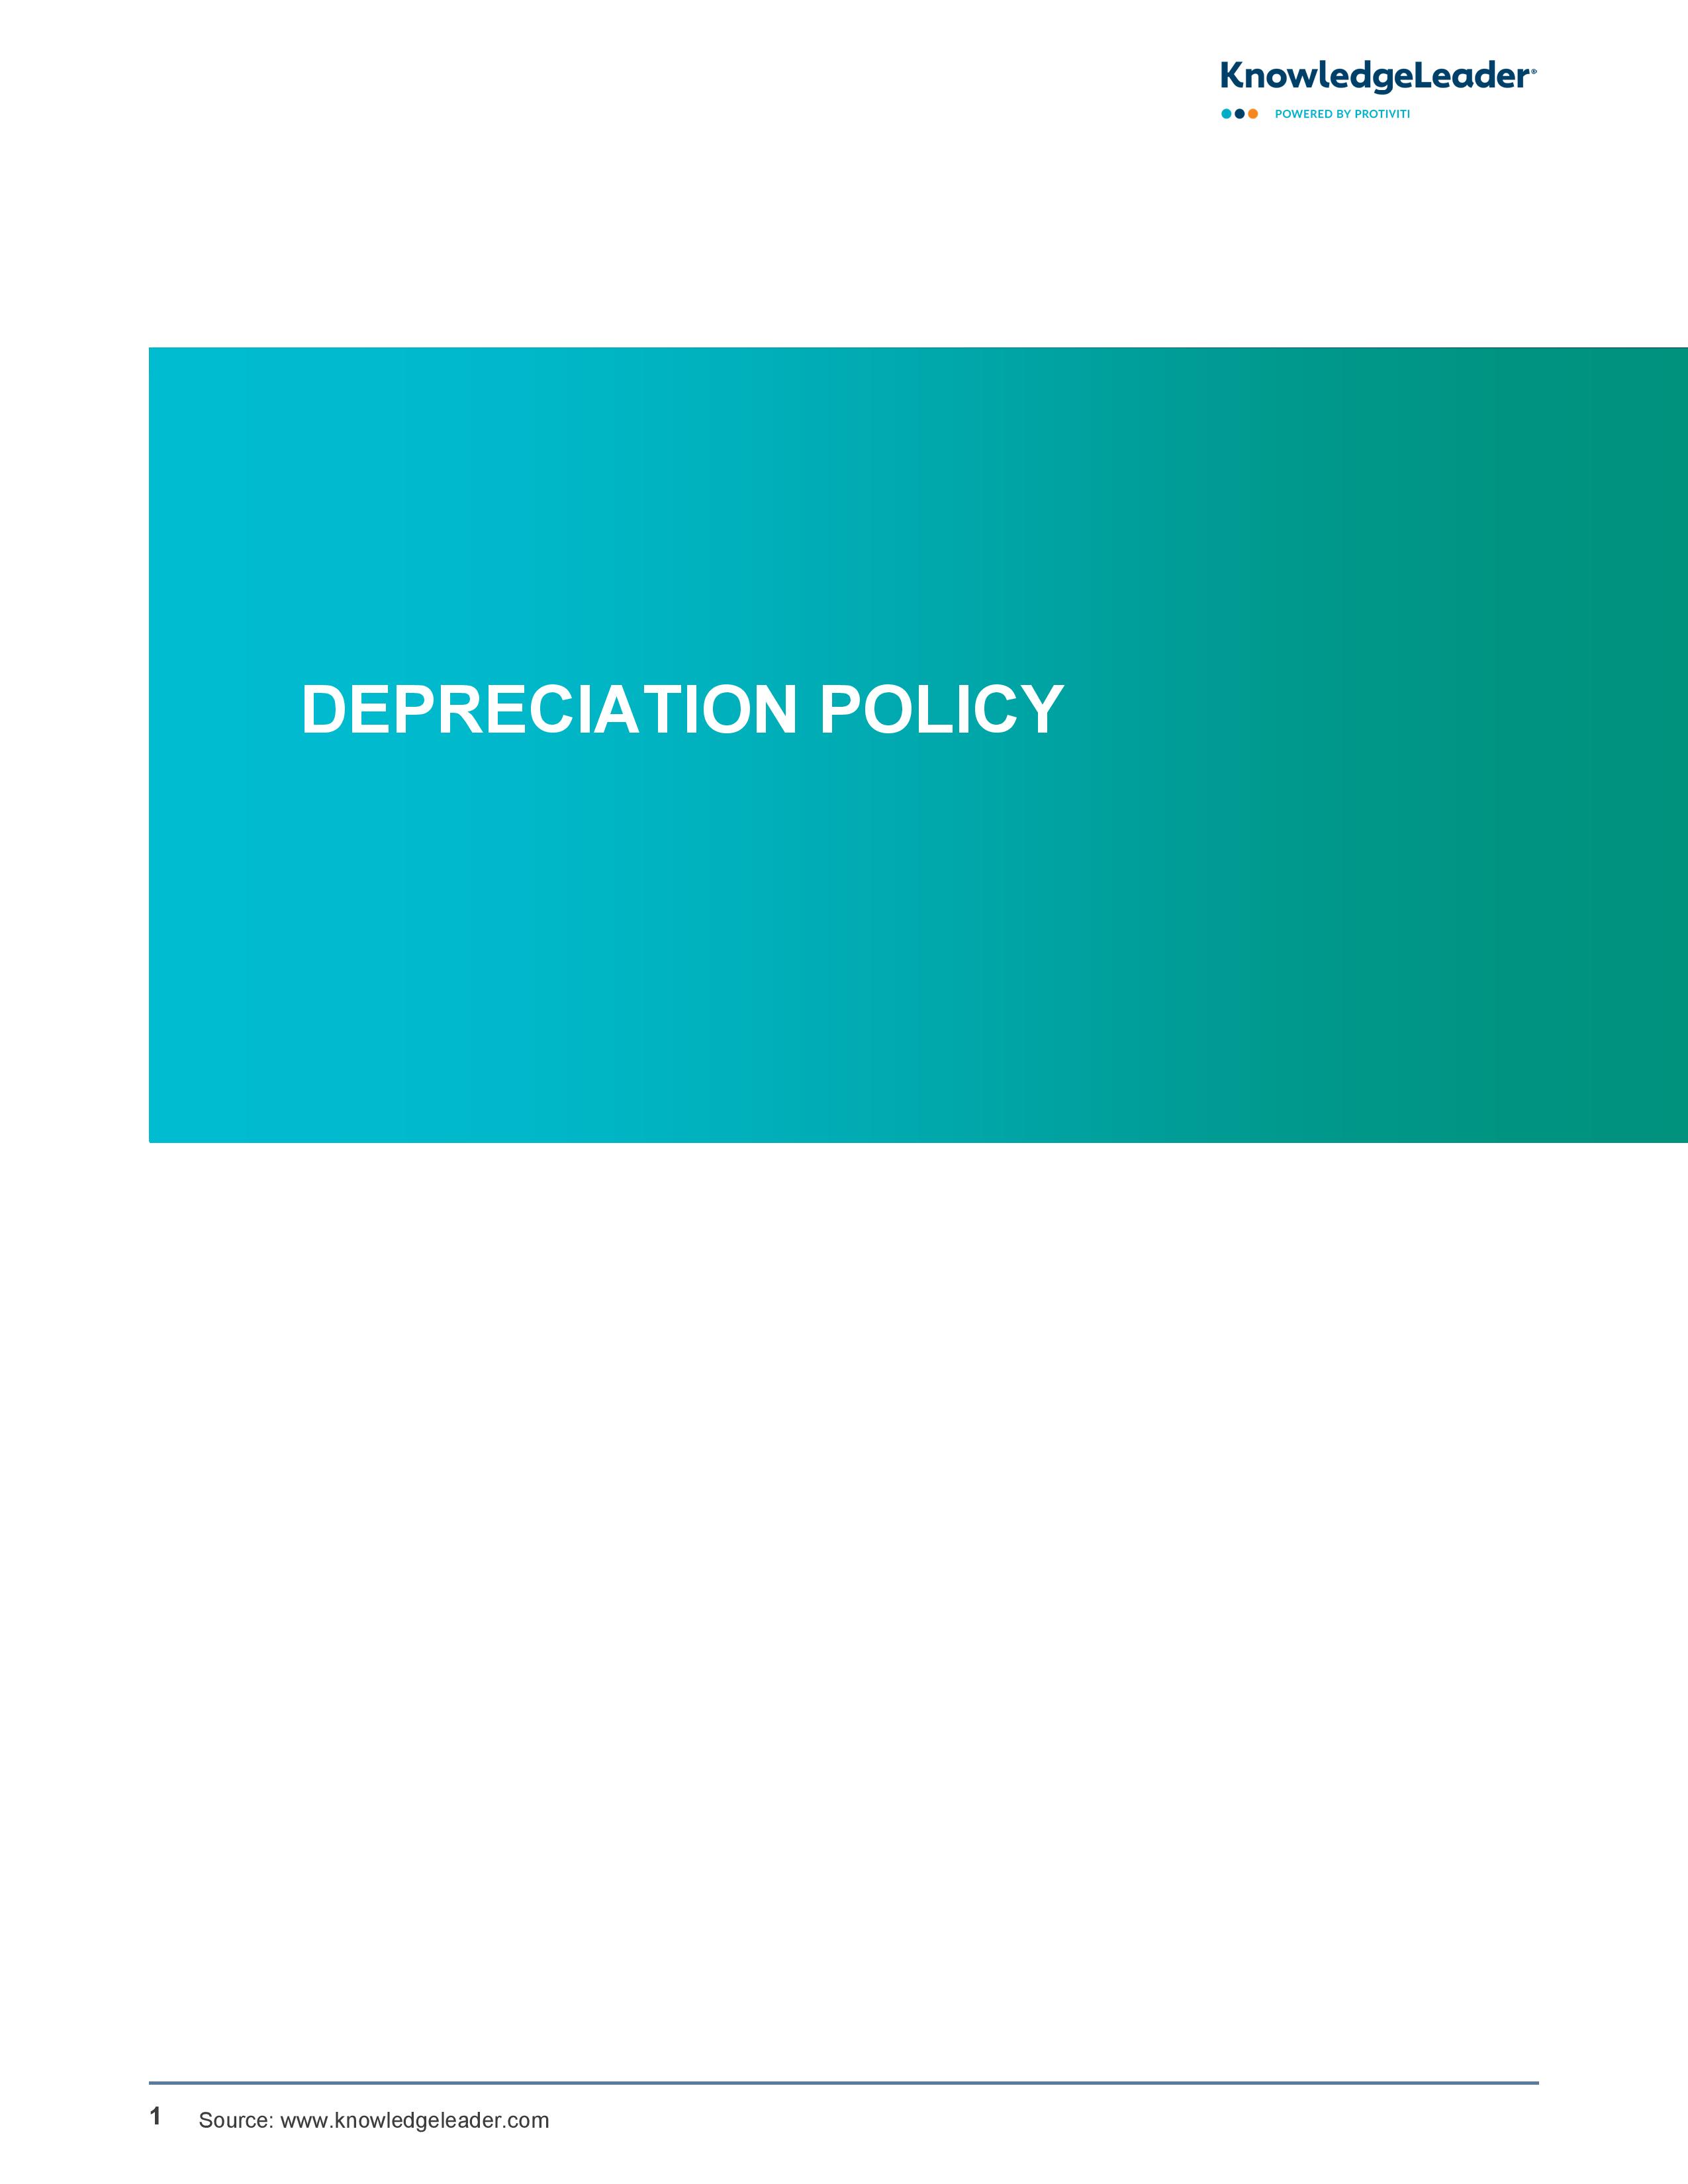 Screenshot of the first page of Depreciation Policy